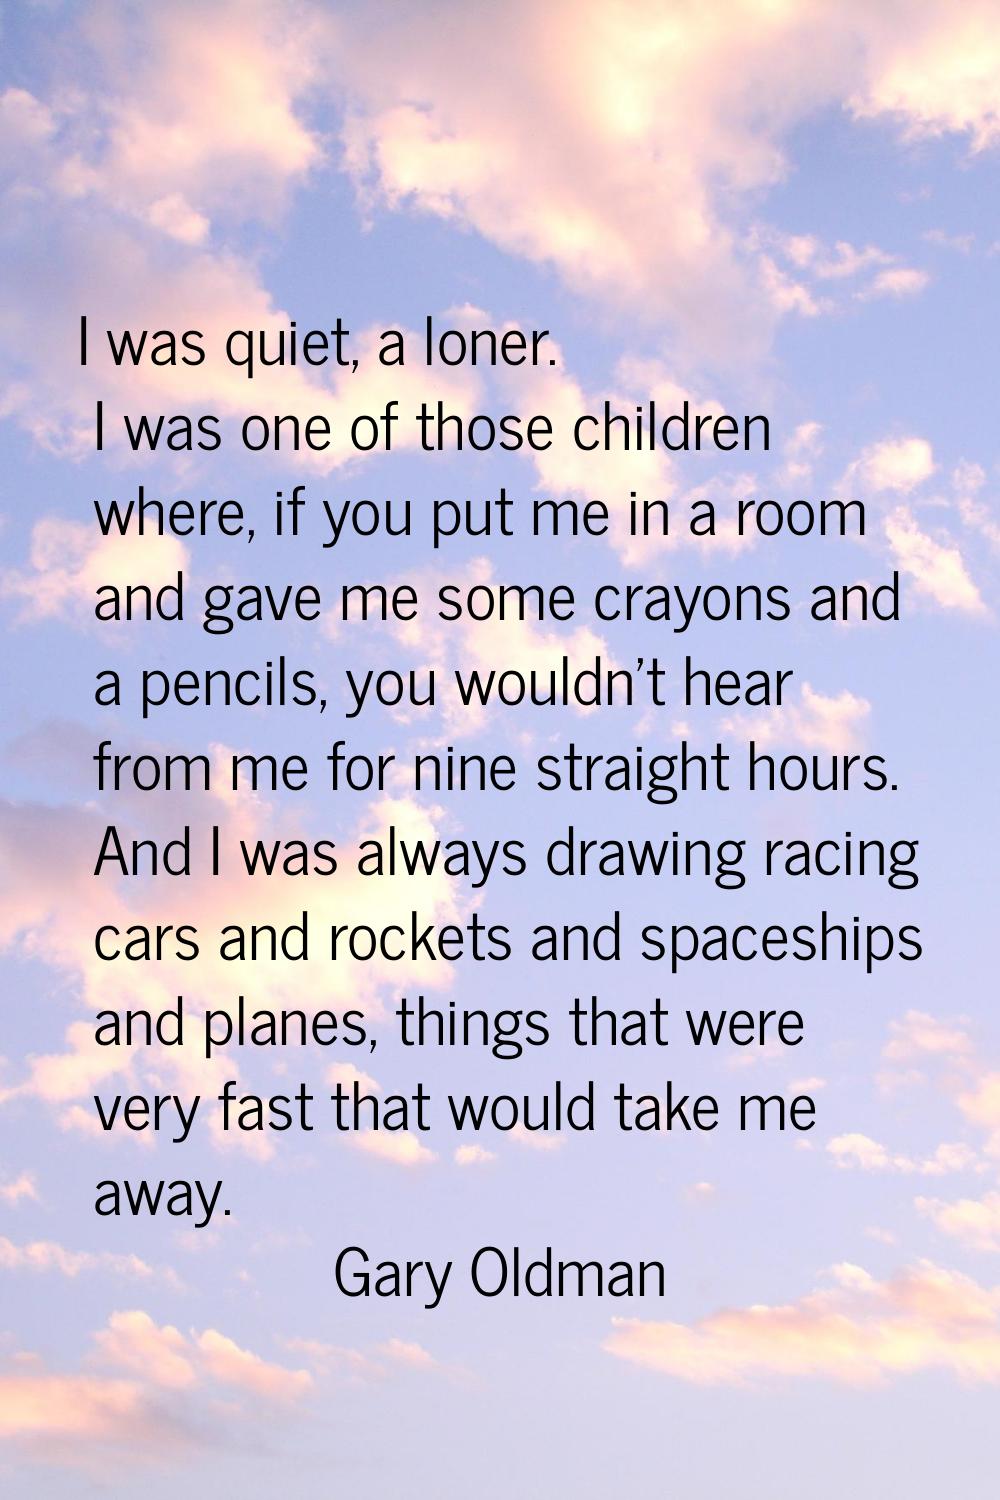 I was quiet, a loner. I was one of those children where, if you put me in a room and gave me some c